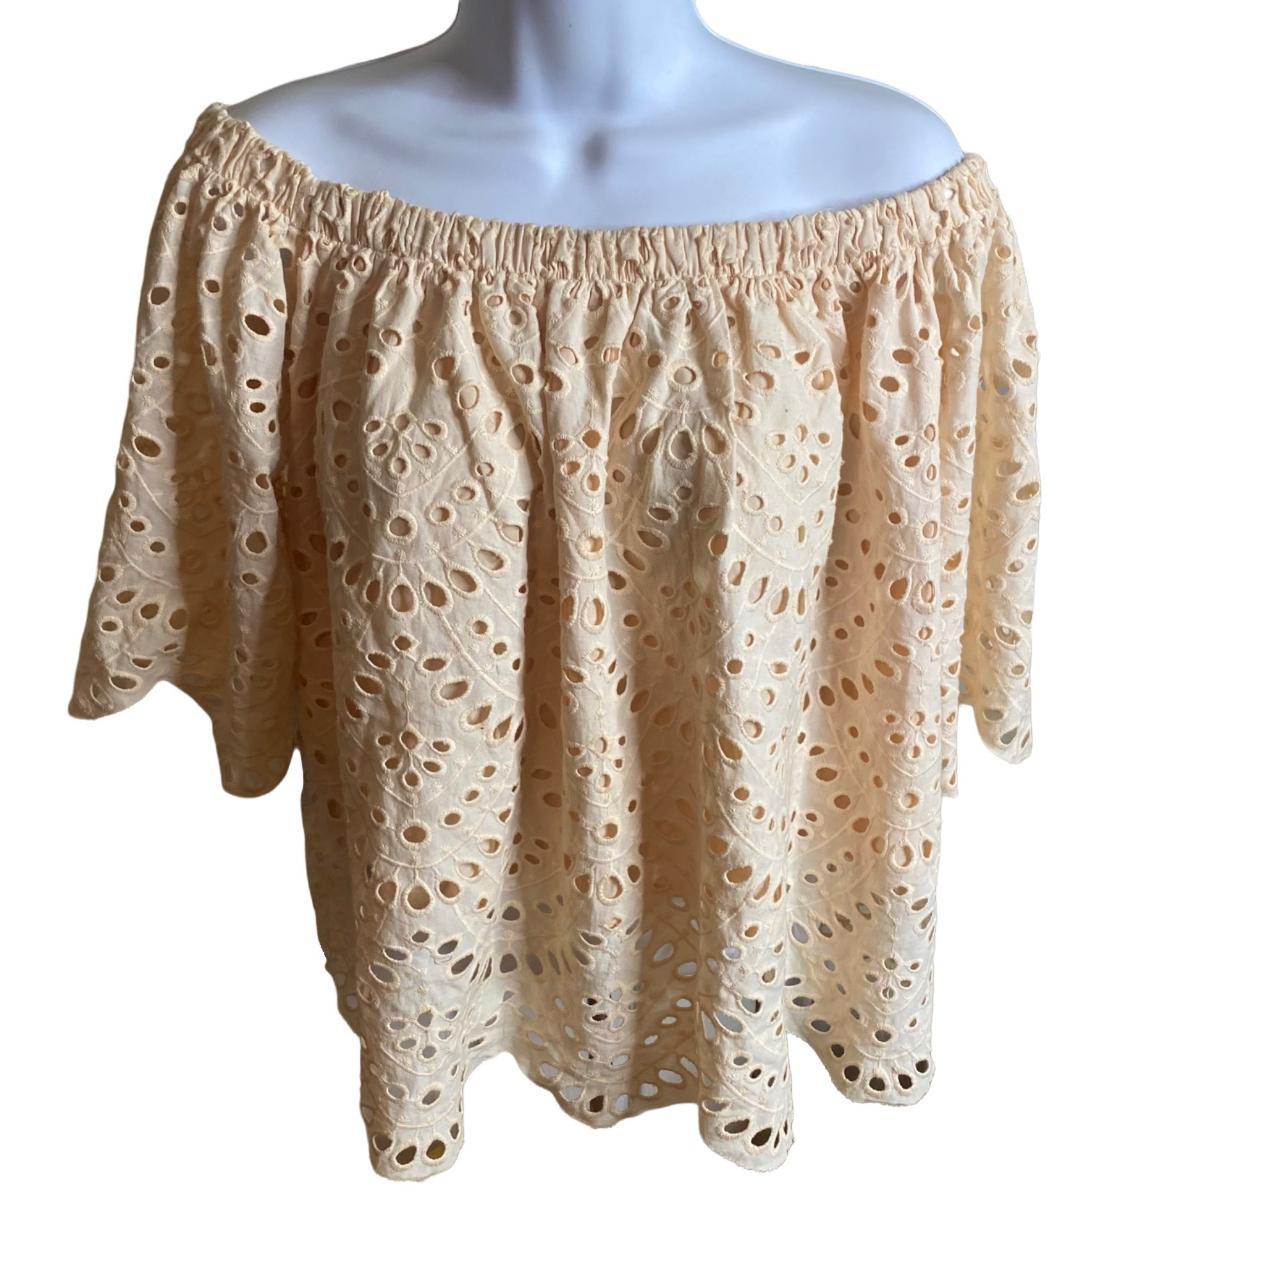 Product Image 1 - MINISTRY OF STYLE TOP

EYELET

PEACH IN